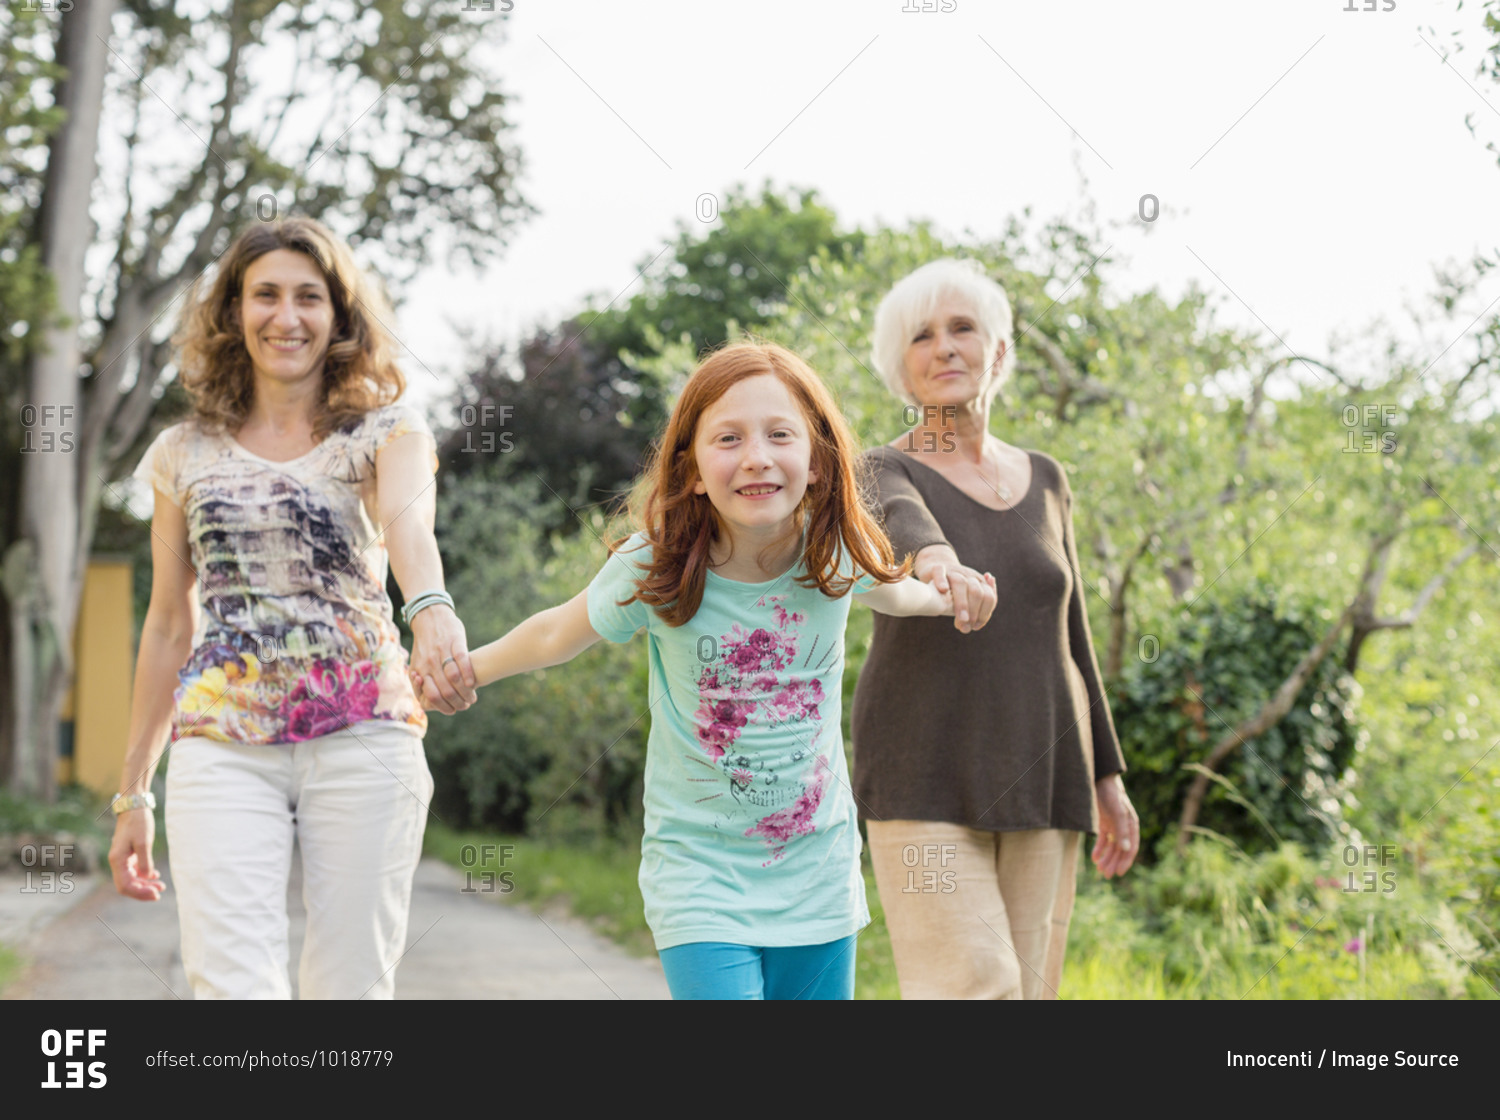 Girl on rural road holding hands with mother and grandmother, portrait